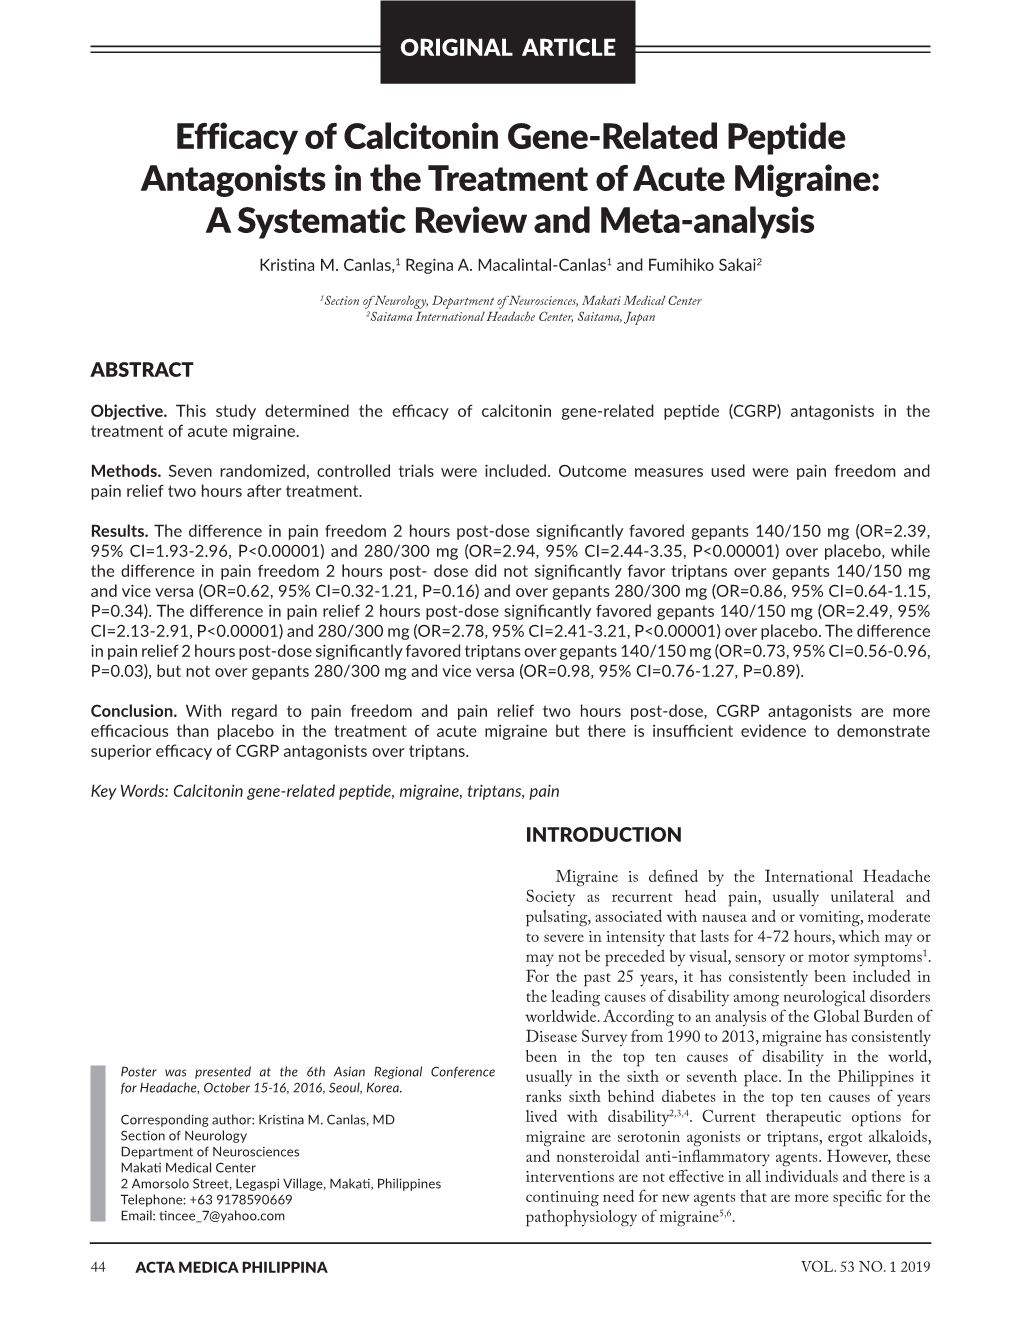 Efficacy of Calcitonin Gene-Related Peptide Antagonists in the Treatment of Acute Migraine: a Systematic Review and Meta-Analysis Kristina M